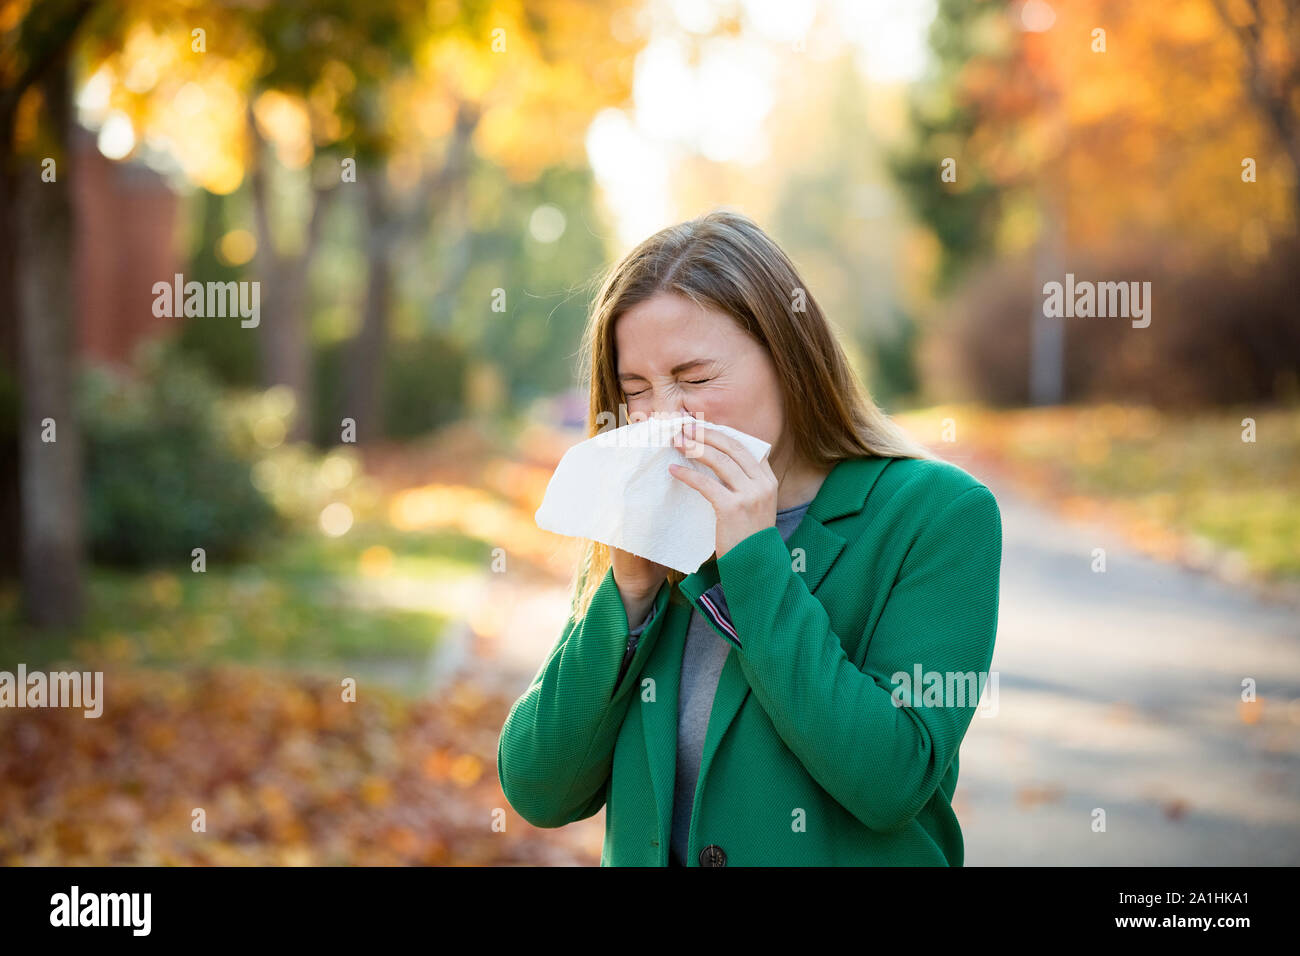 Sick young woman with cold and flu standing outdoors, sneezing, wiping nose with handkerchief, coughing. Autumn street background Stock Photo